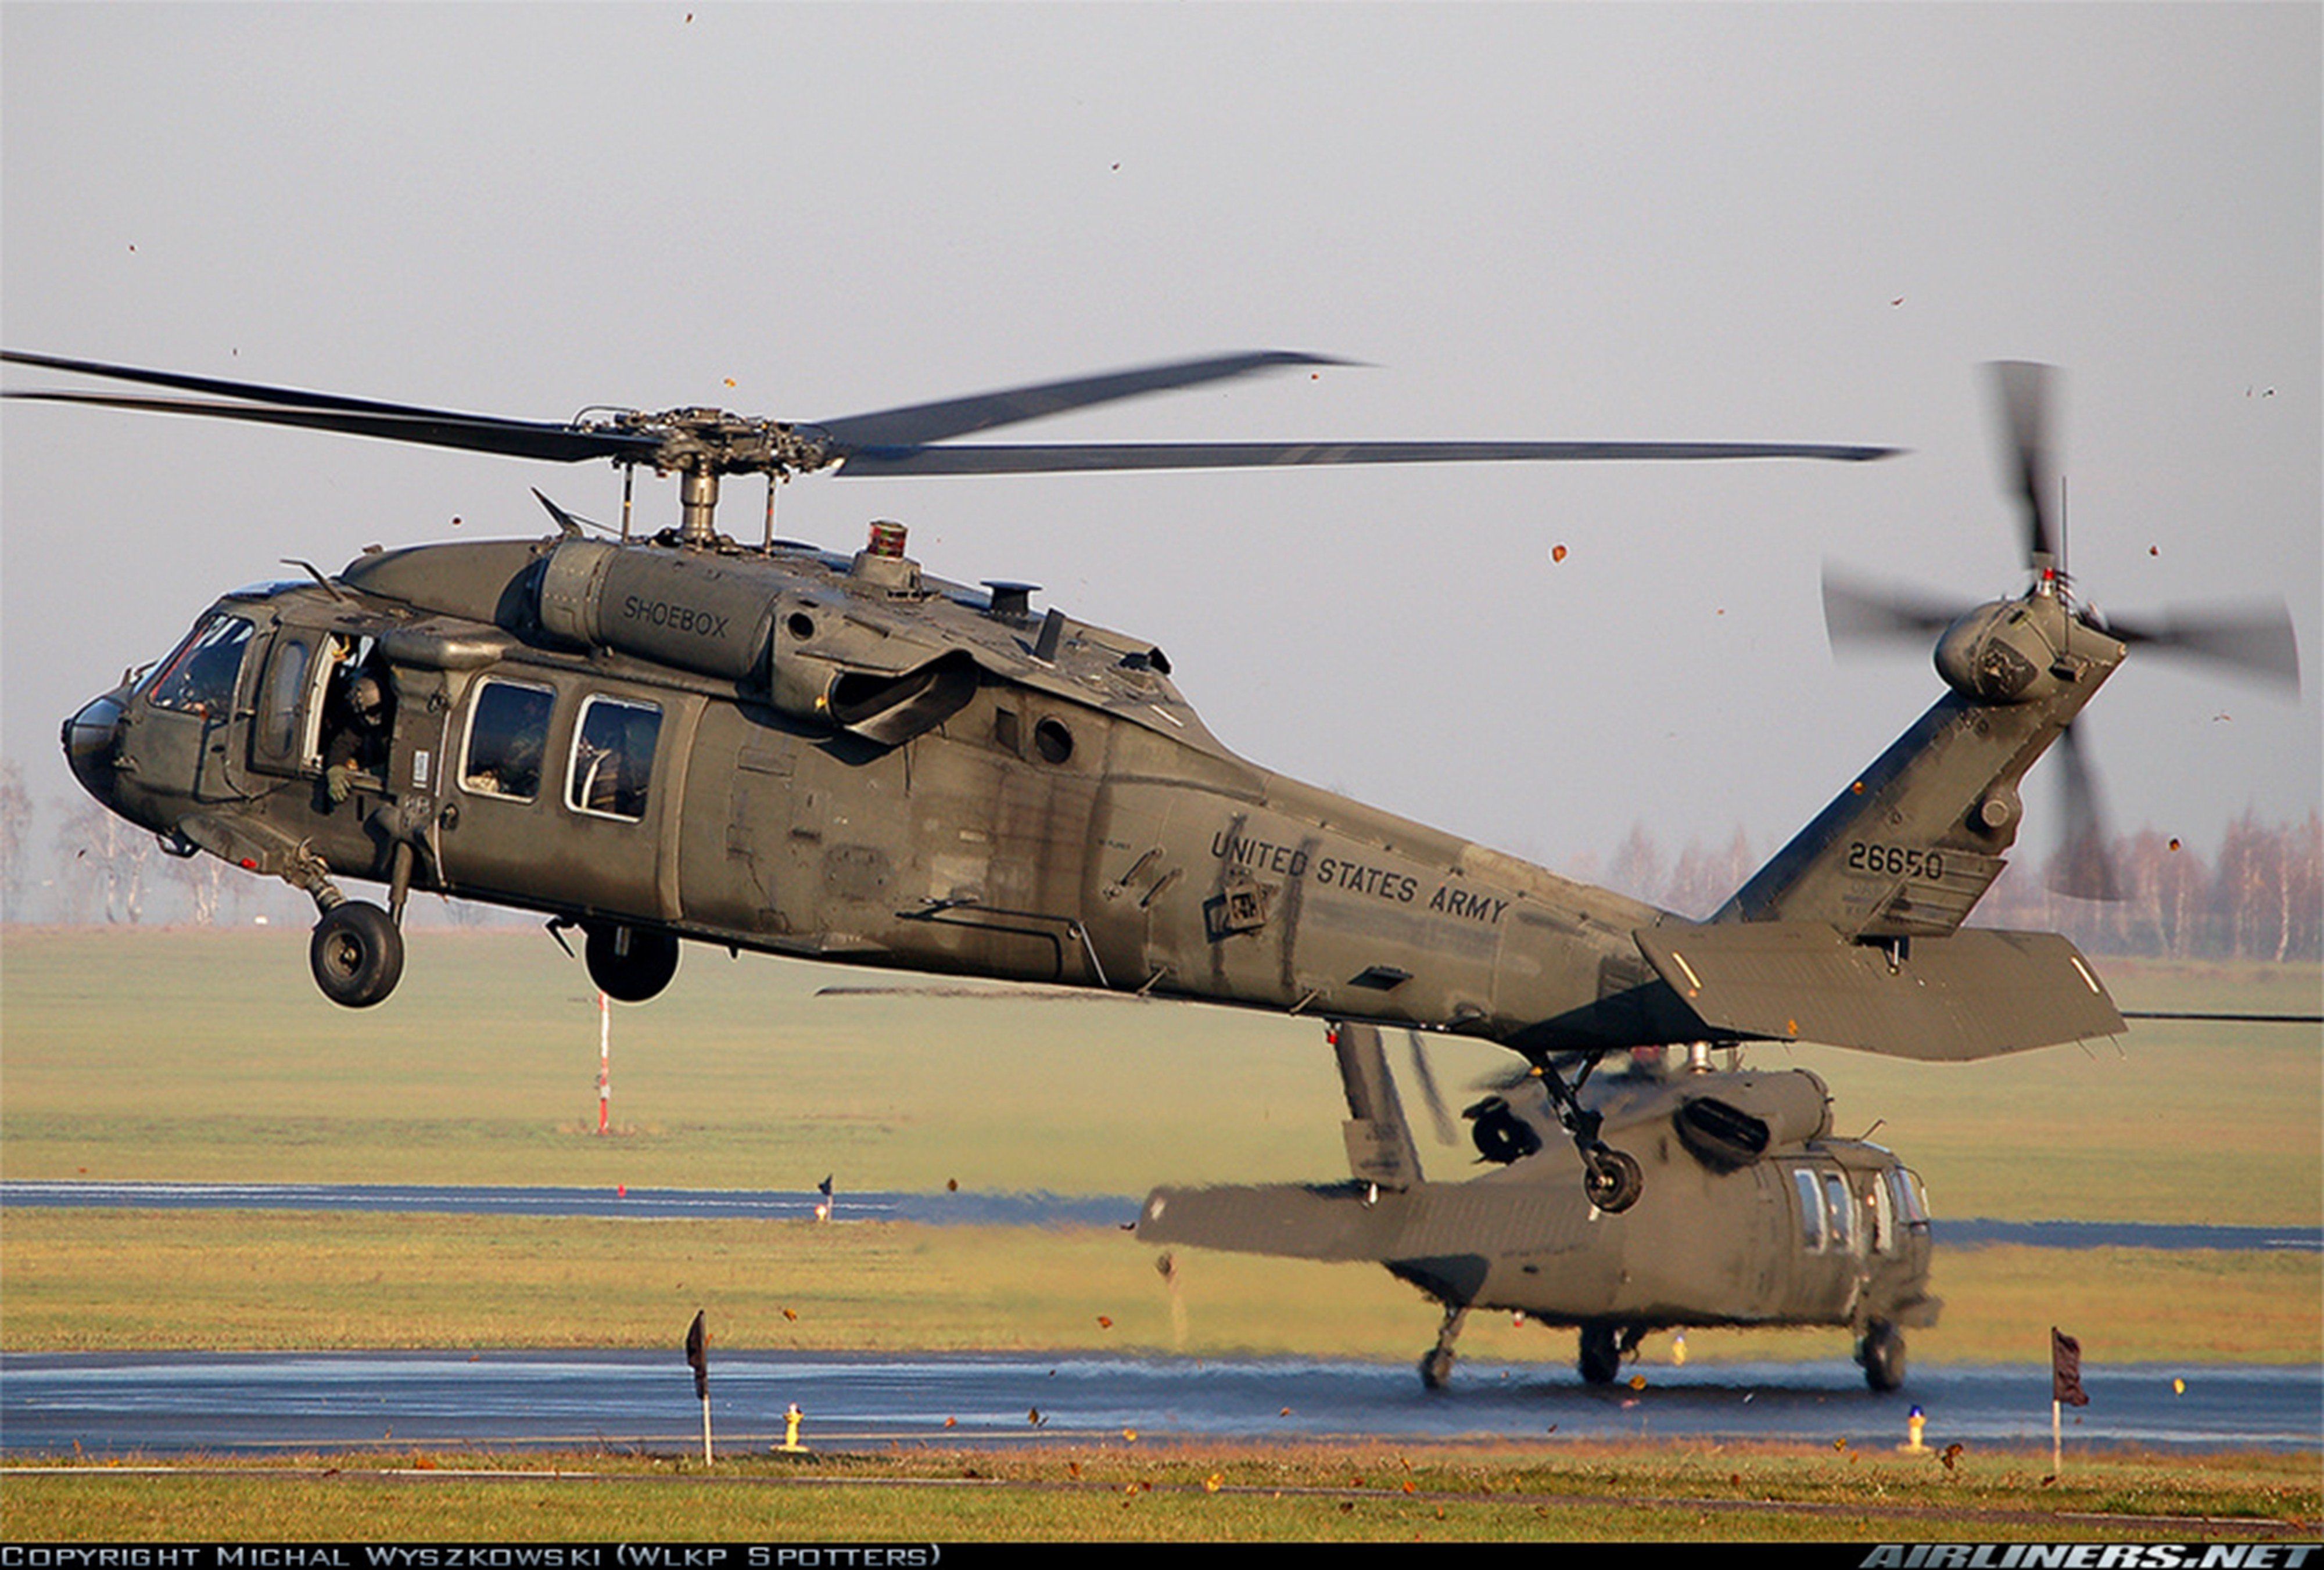 helicopter, Aircraft, Vehicle, Military, Army, Black, Hawk